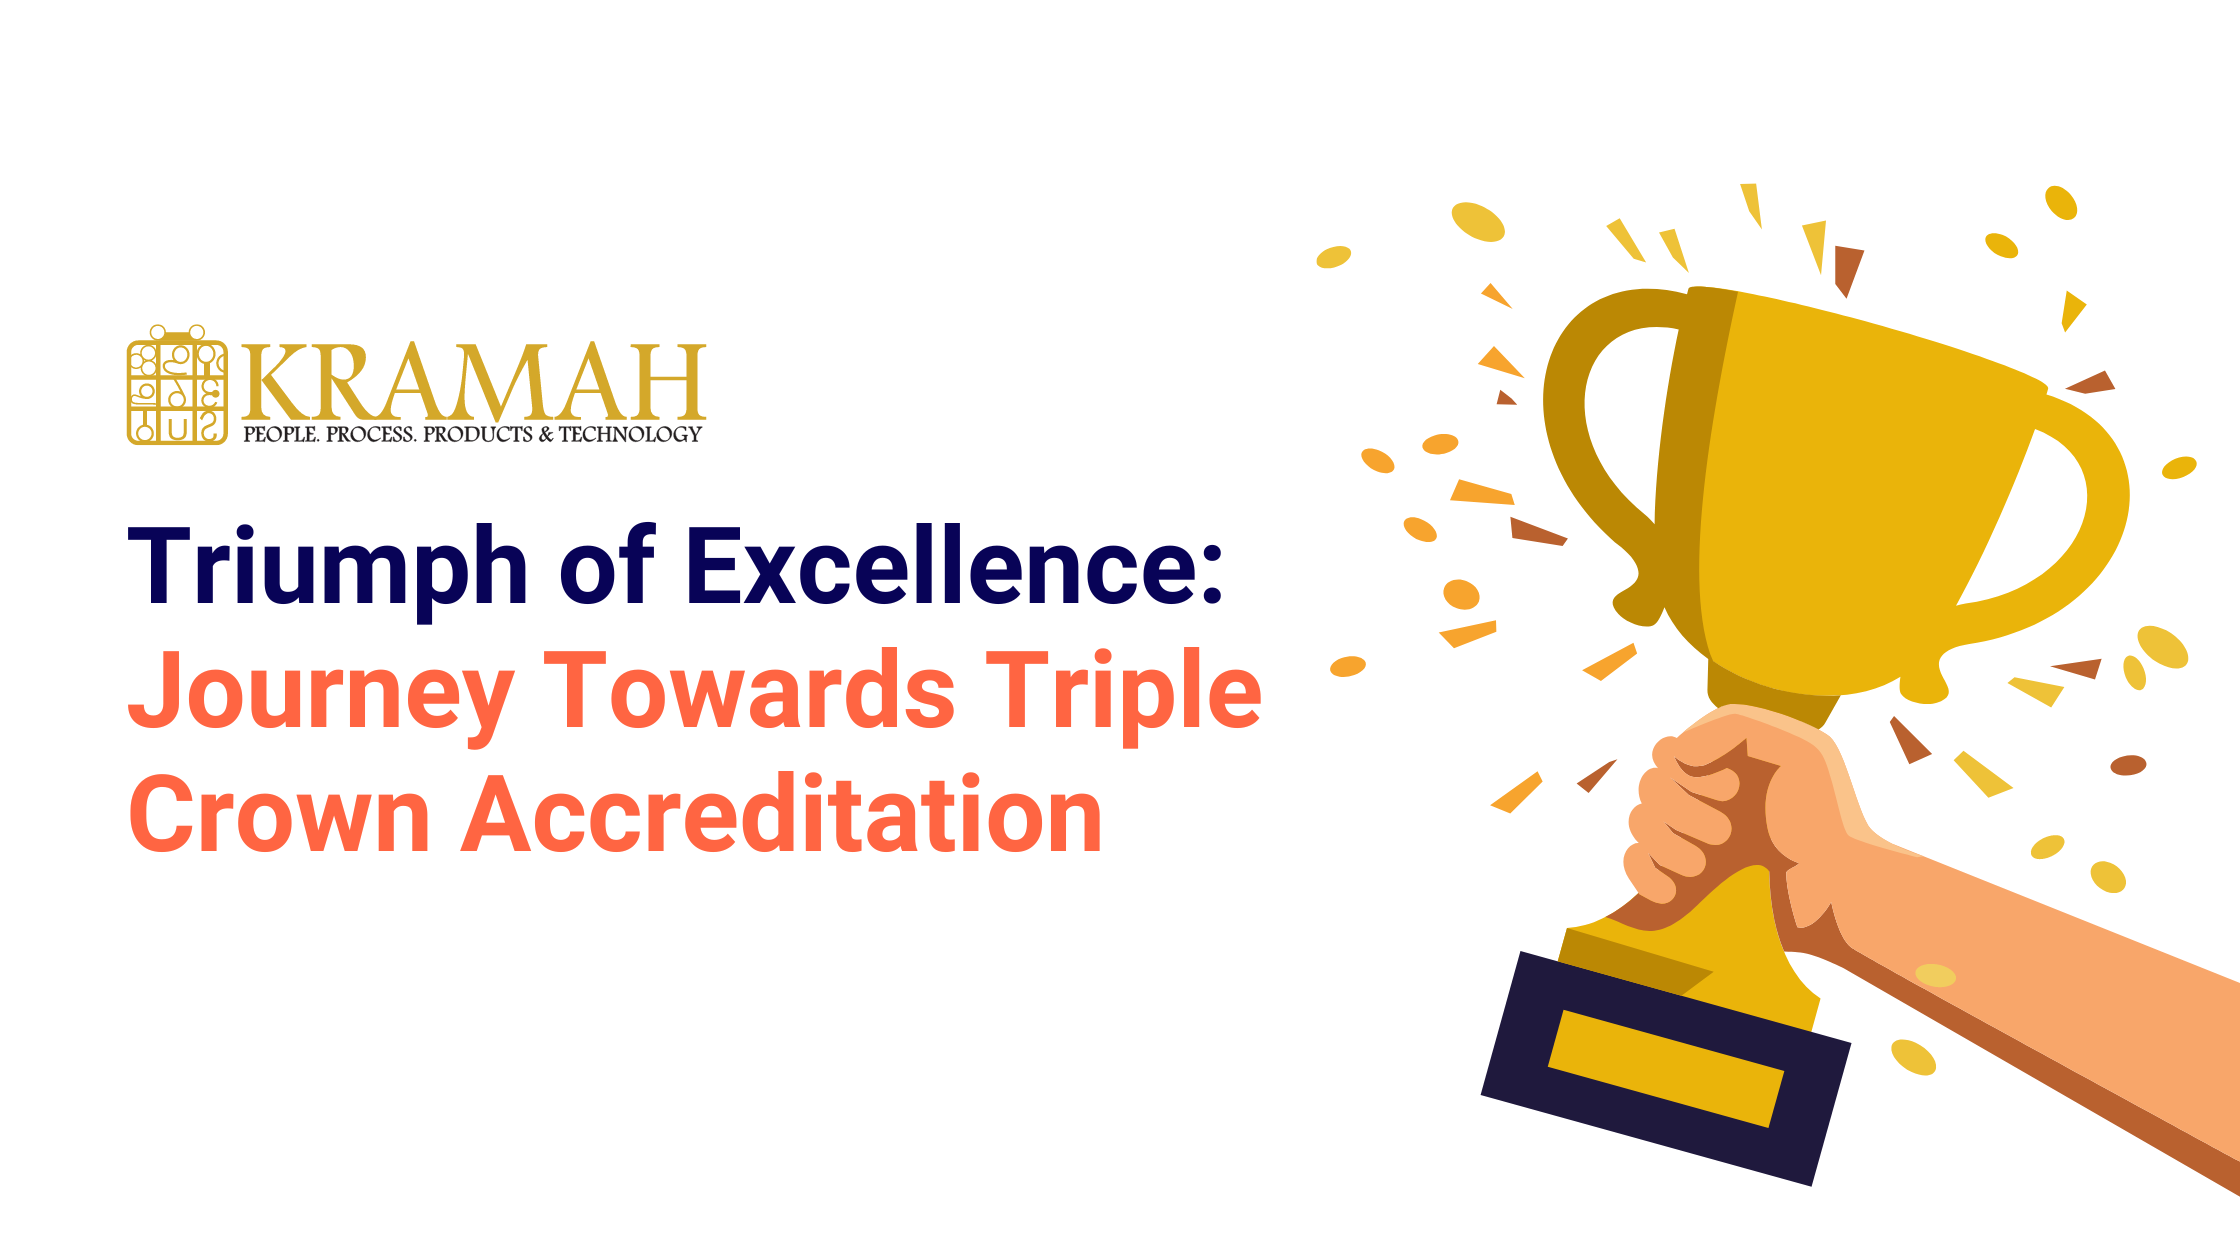 Triumph of Excellence: Journey Towards Triple Crown Accreditation